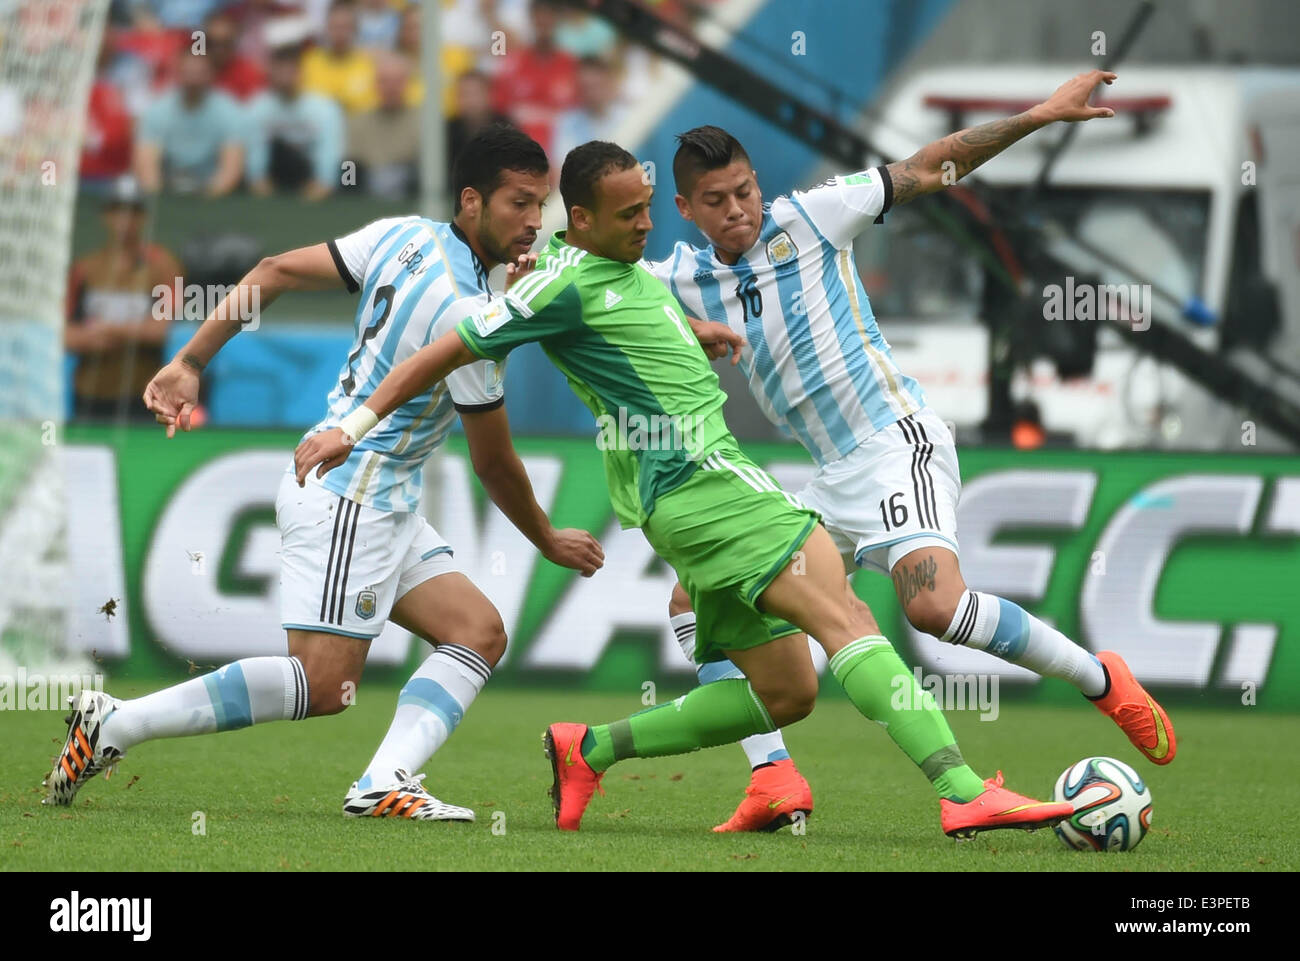 Porto Alegre, Brazil. 25th June, 2014. Nigeria's Peter Osaze Odemwingie (C) competes with Argentina's Ezequiel Garay (L) and Marcos Rojo during a Group F match between Nigeria and Argentina of 2014 FIFA World Cup at the Estadio Beira-Rio Stadium in Porto Alegre, Brazil, on June 25, 2014. Argentina won 3-2 over Nigeria on Wednesday. © Li Ga/Xinhua/Alamy Live News Stock Photo